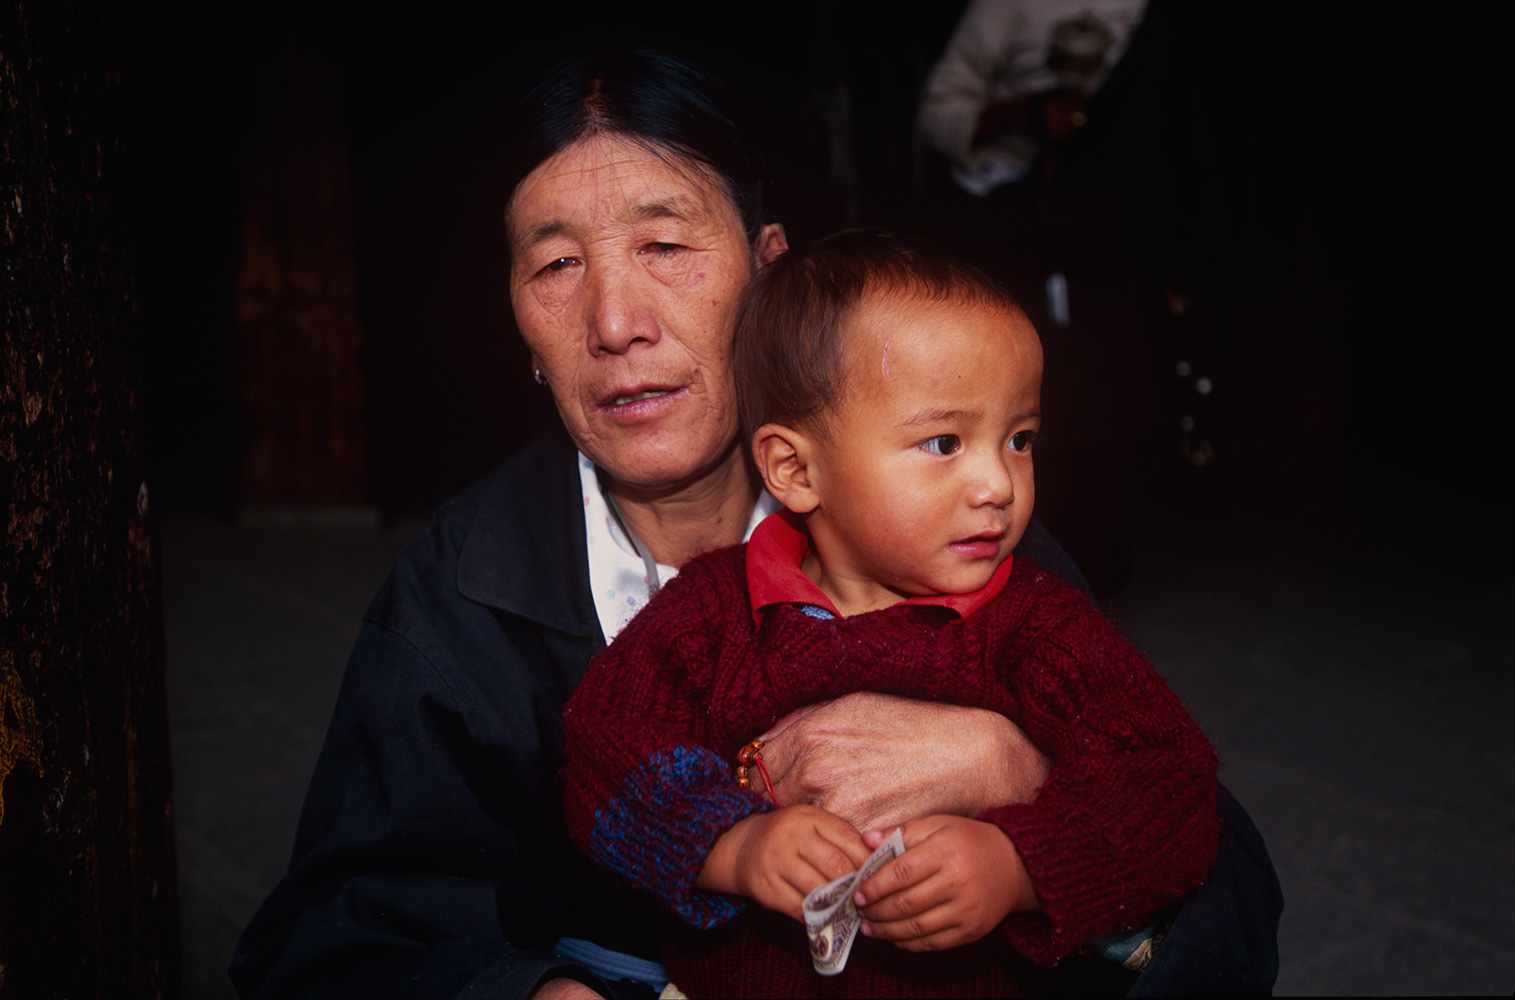 A woman pilgrim resting with her son in the courtyard.Nikon F5, 35mm, Fuji Velvia